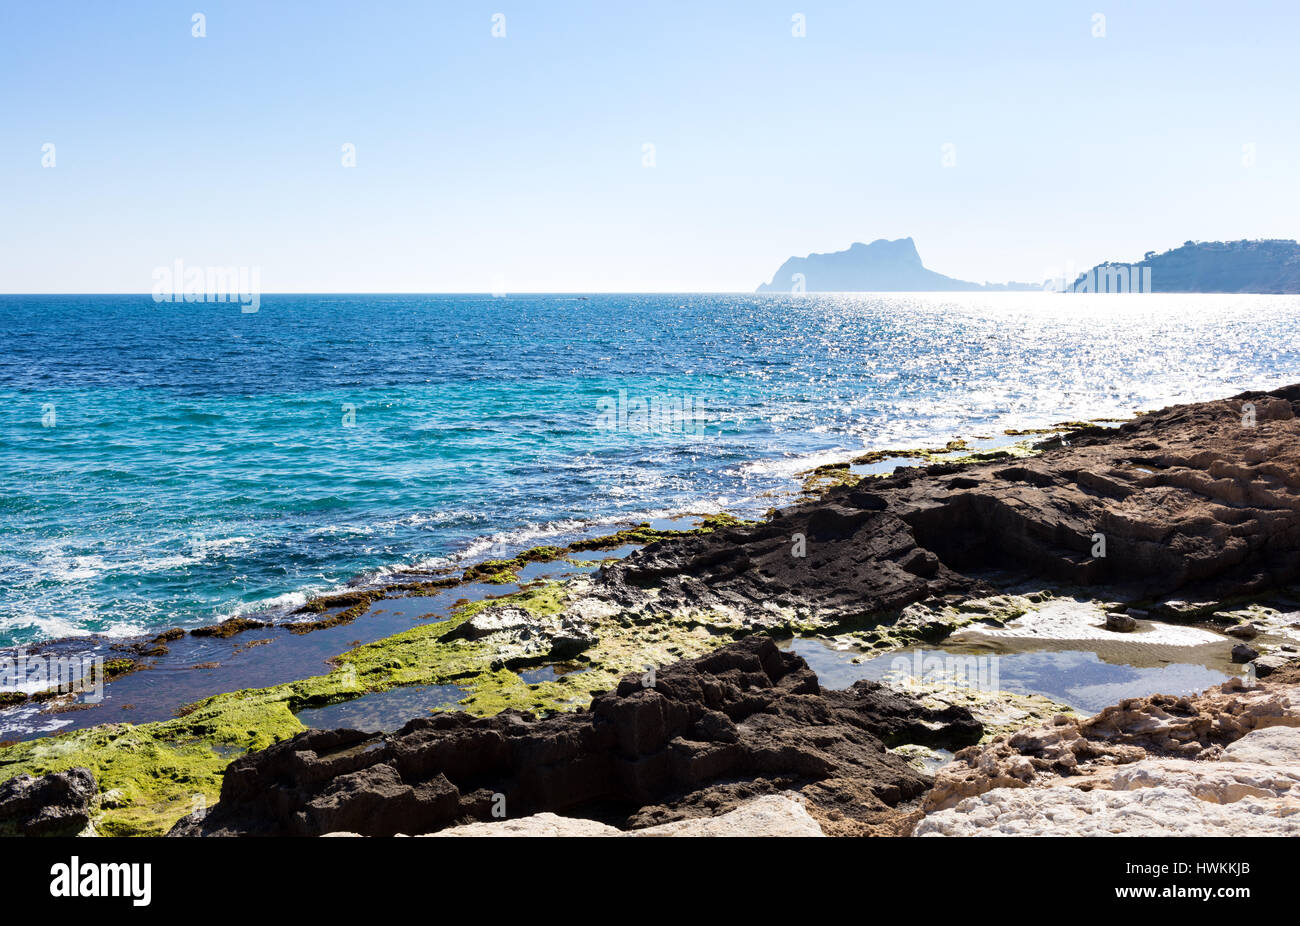 Mediterranean coast just to go for a walk listening the waves and feeling the sun. Photo taken from Moraira walkway Stock Photo